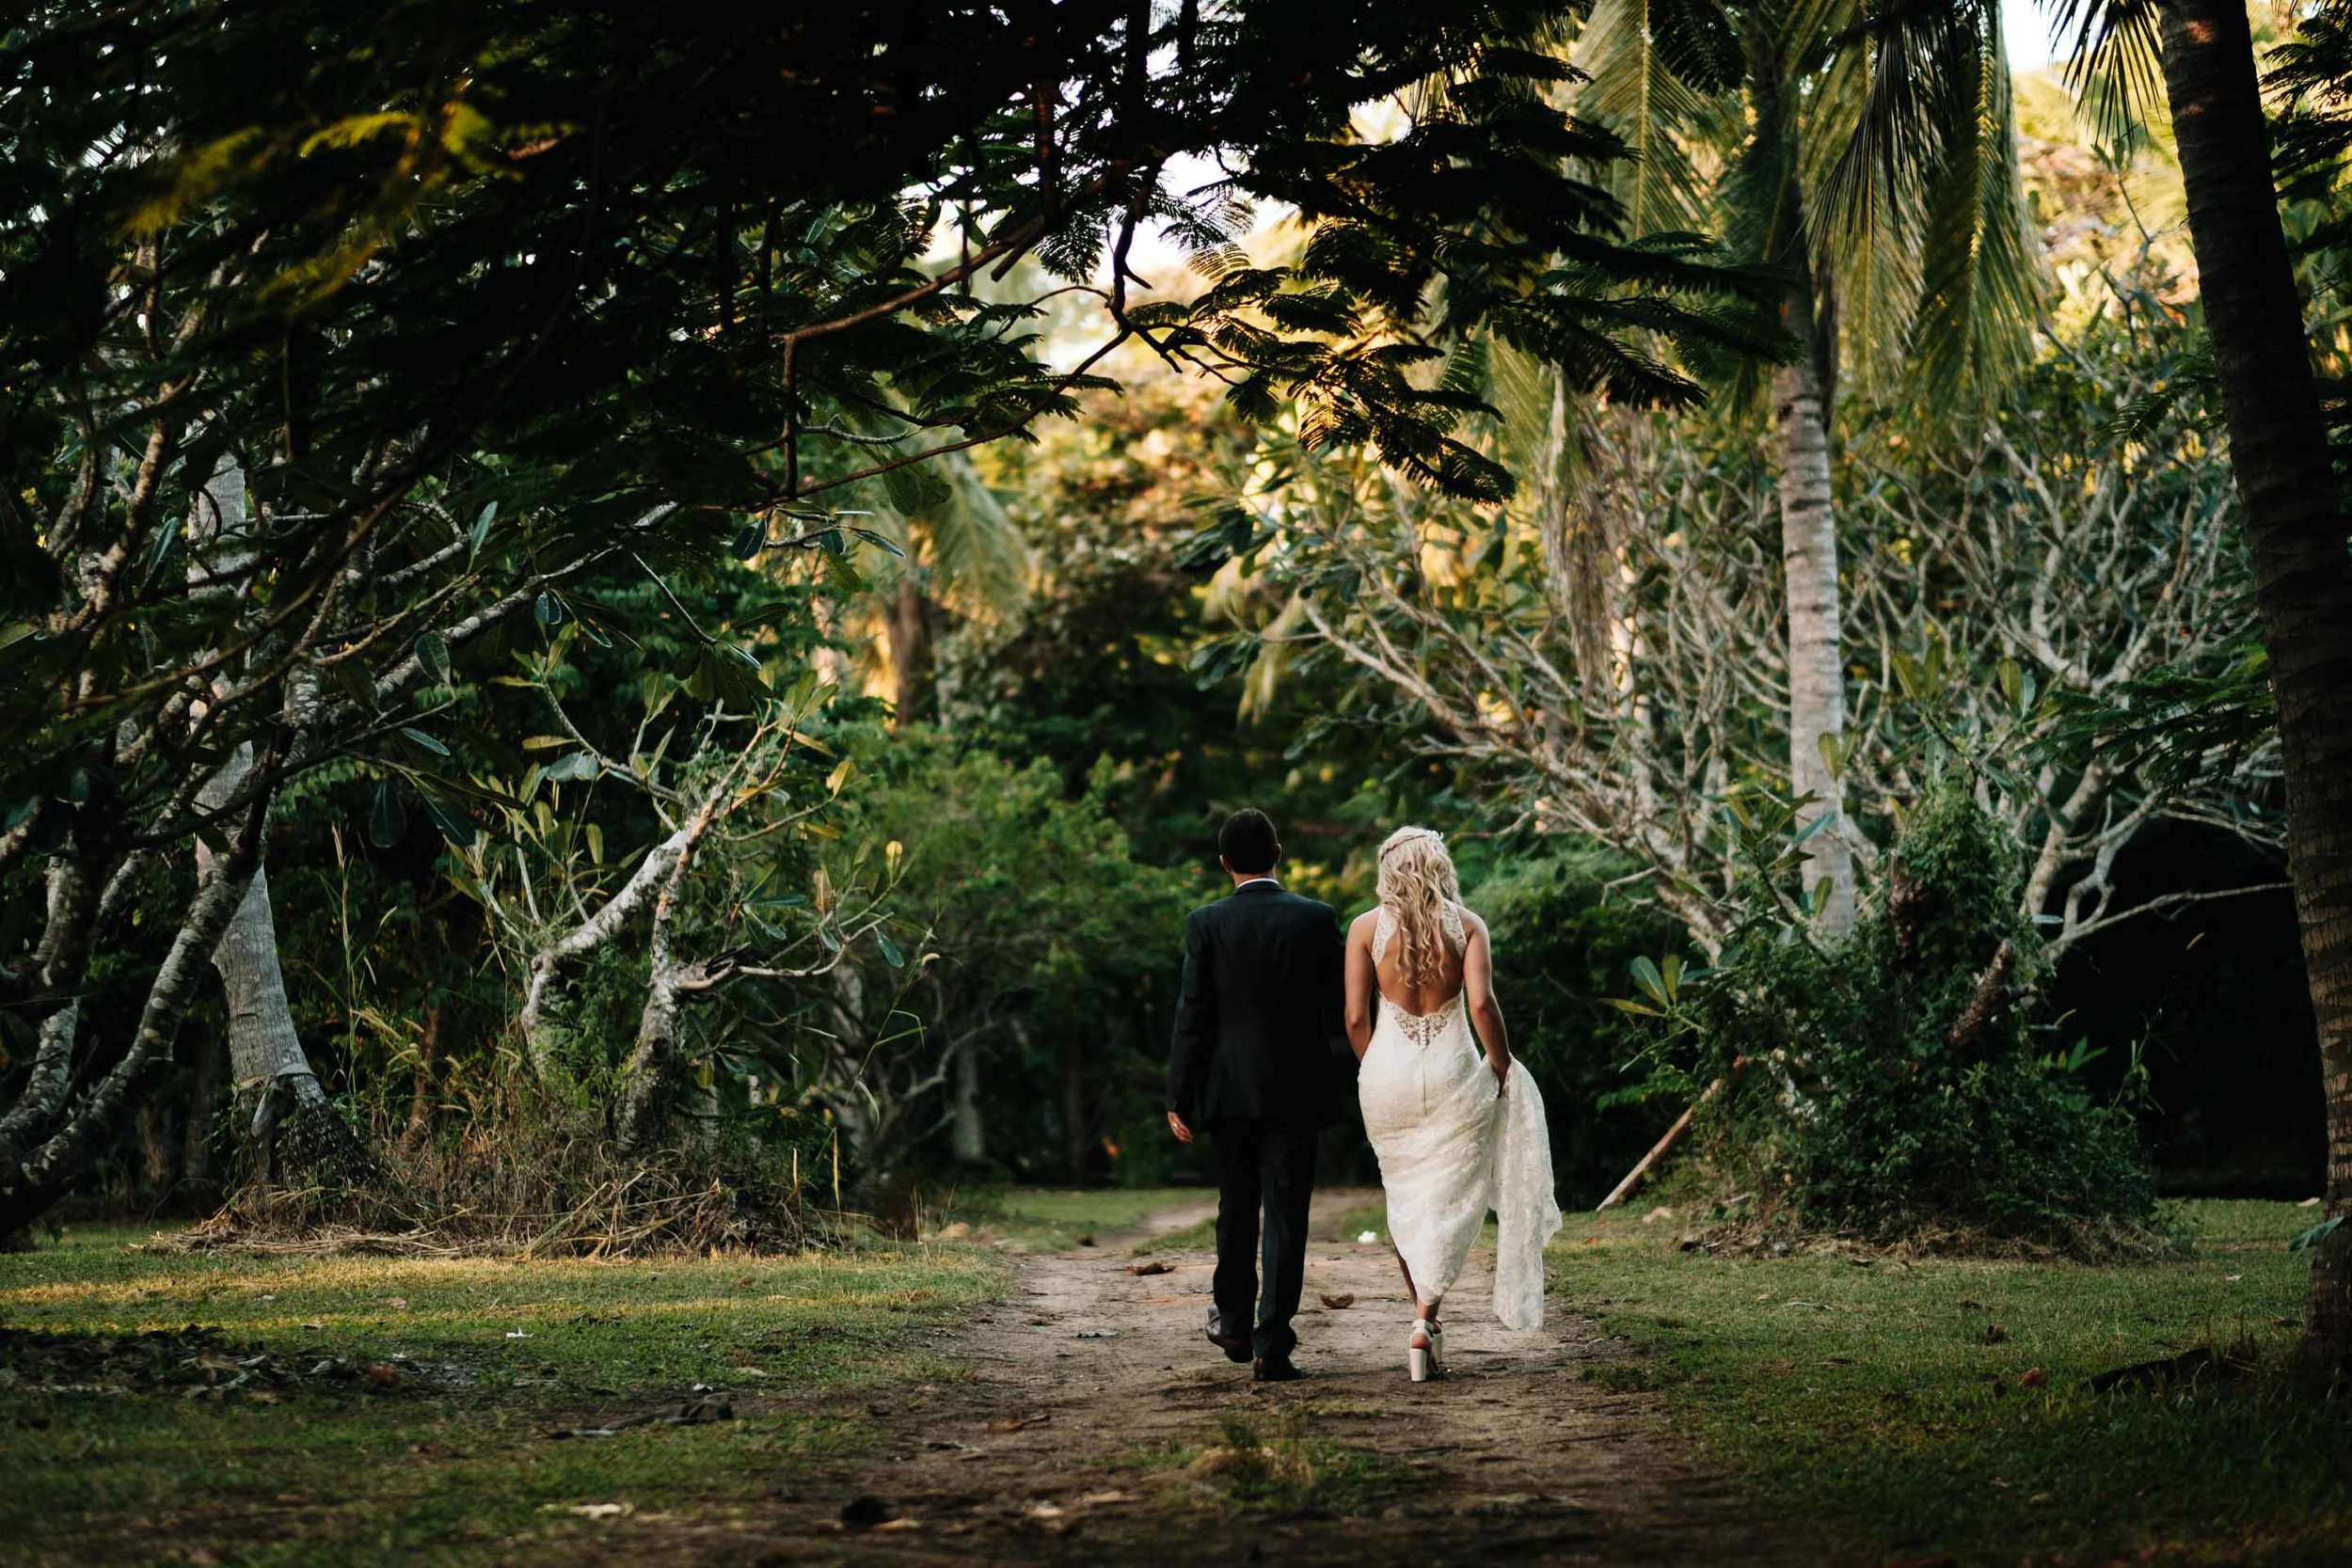 the bride and groom walking away together hand in hand under trees on a sandy dirt road